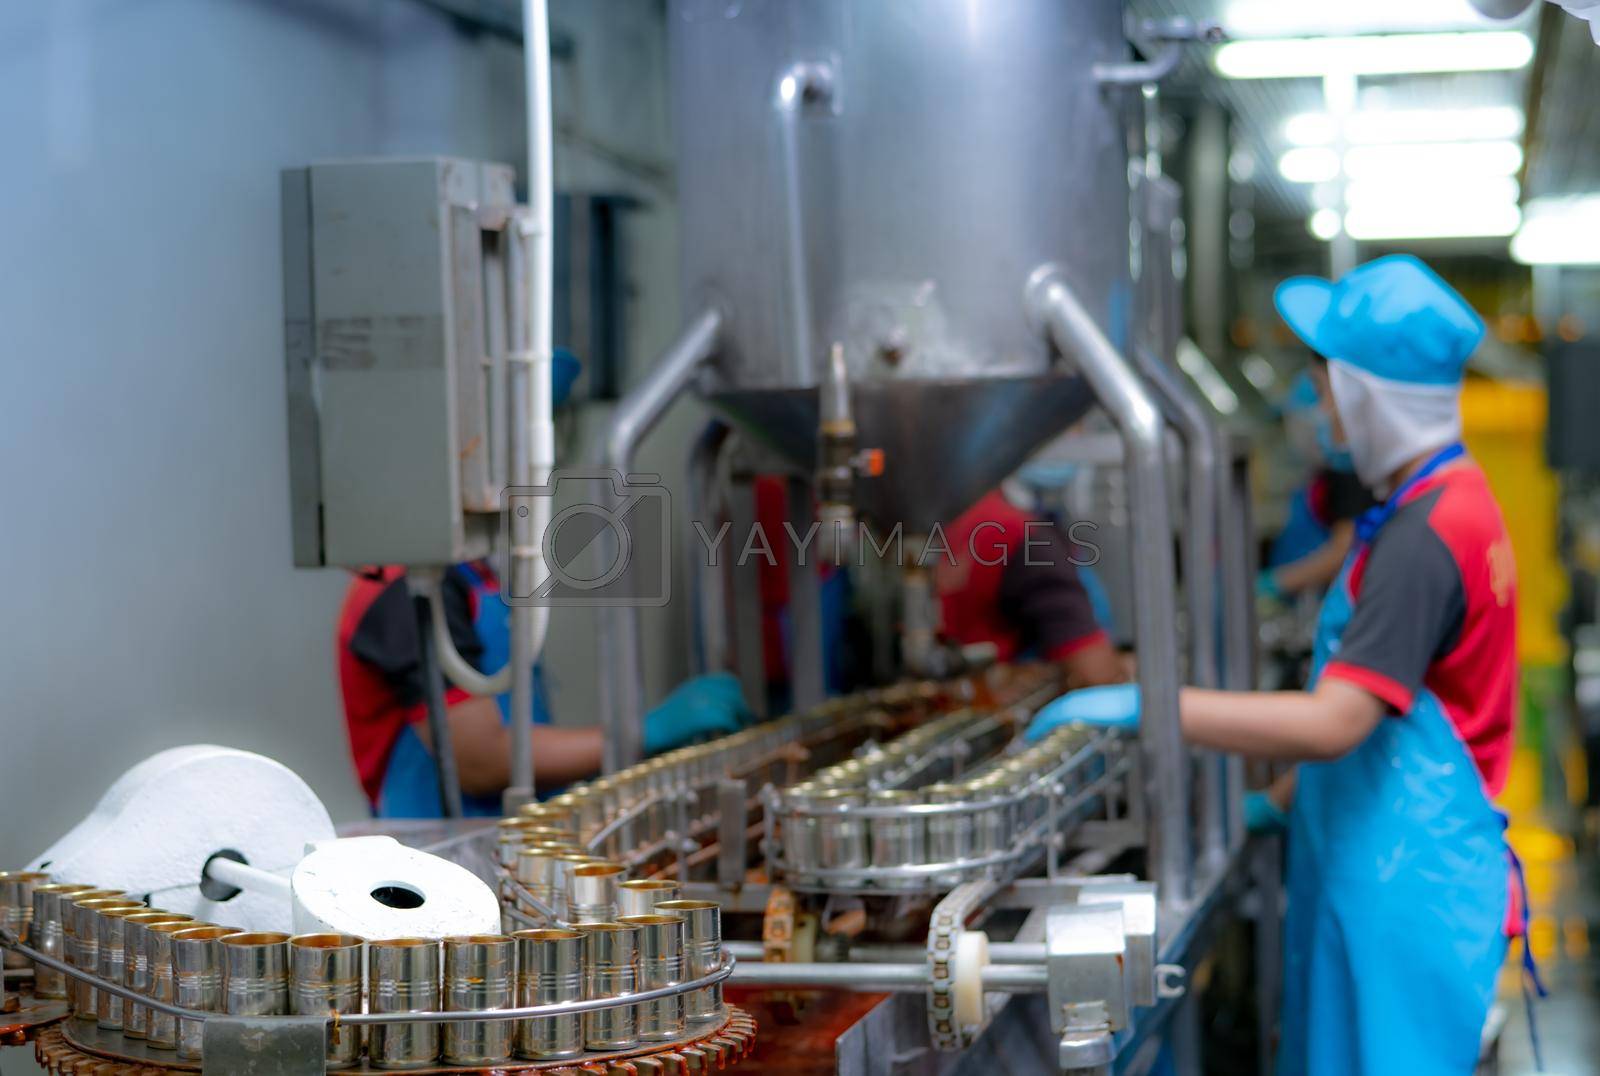 Royalty free image of Canned fish factory. Food industry.  Sardines in red tomato sauce in tinned cans on conveyor belt at food factory. Blur workers working in food processing production line. Food manufacturing industry. by Fahroni